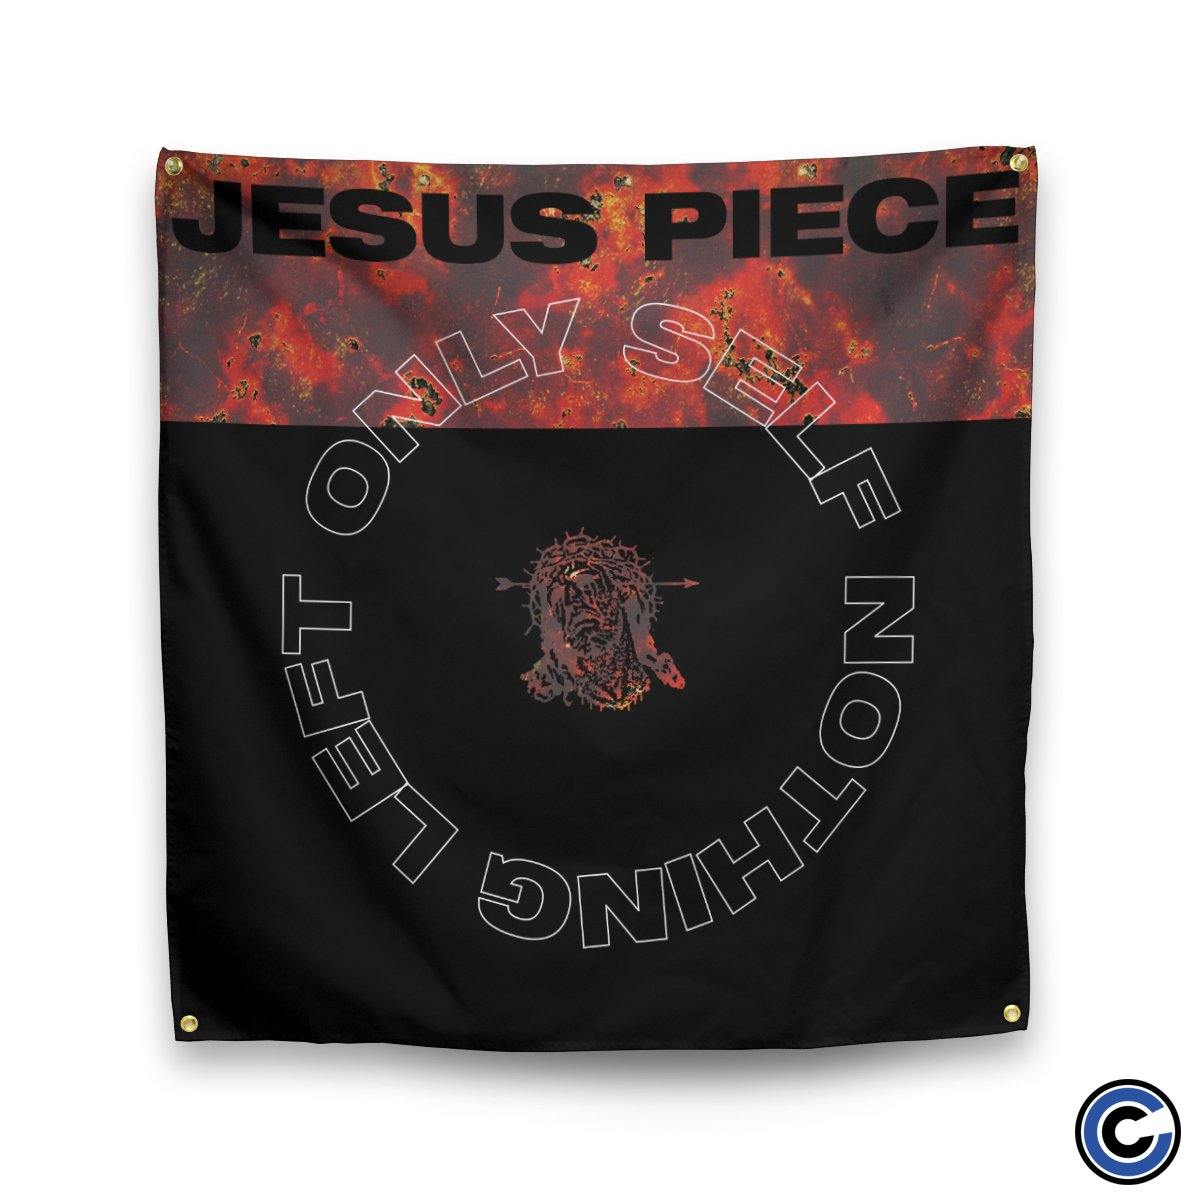 Buy – Jesus Piece "Only Self" Flag – Band & Music Merch – Cold Cuts Merch